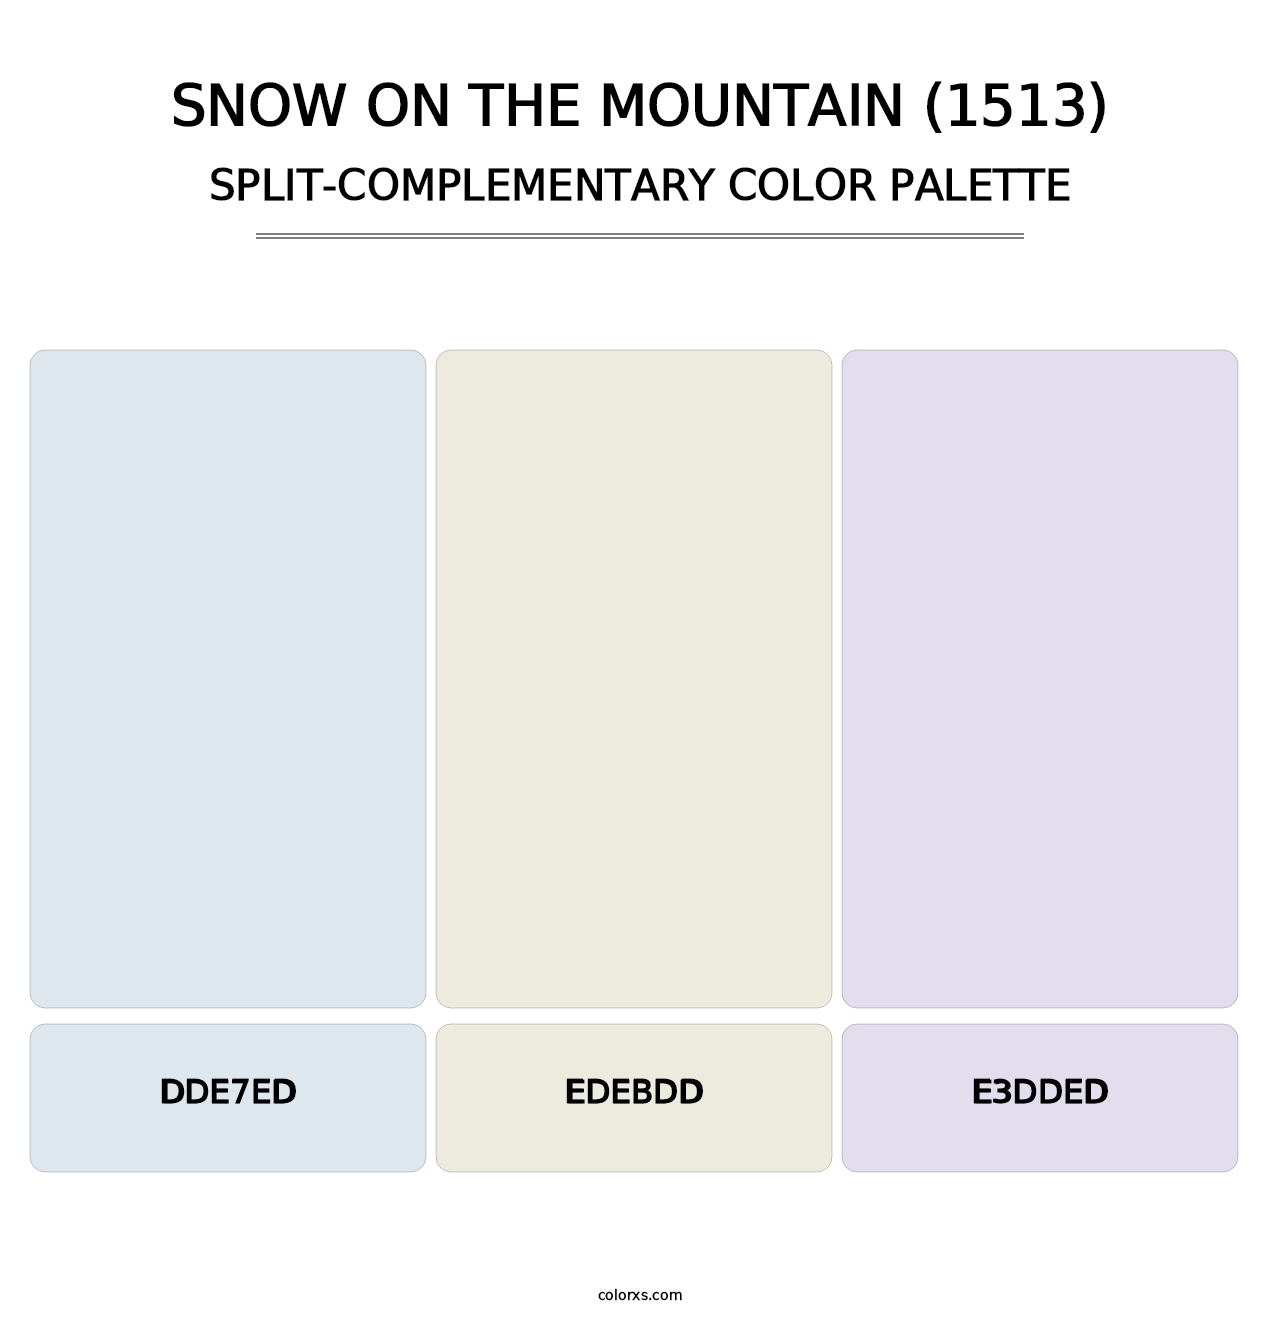 Snow on the Mountain (1513) - Split-Complementary Color Palette